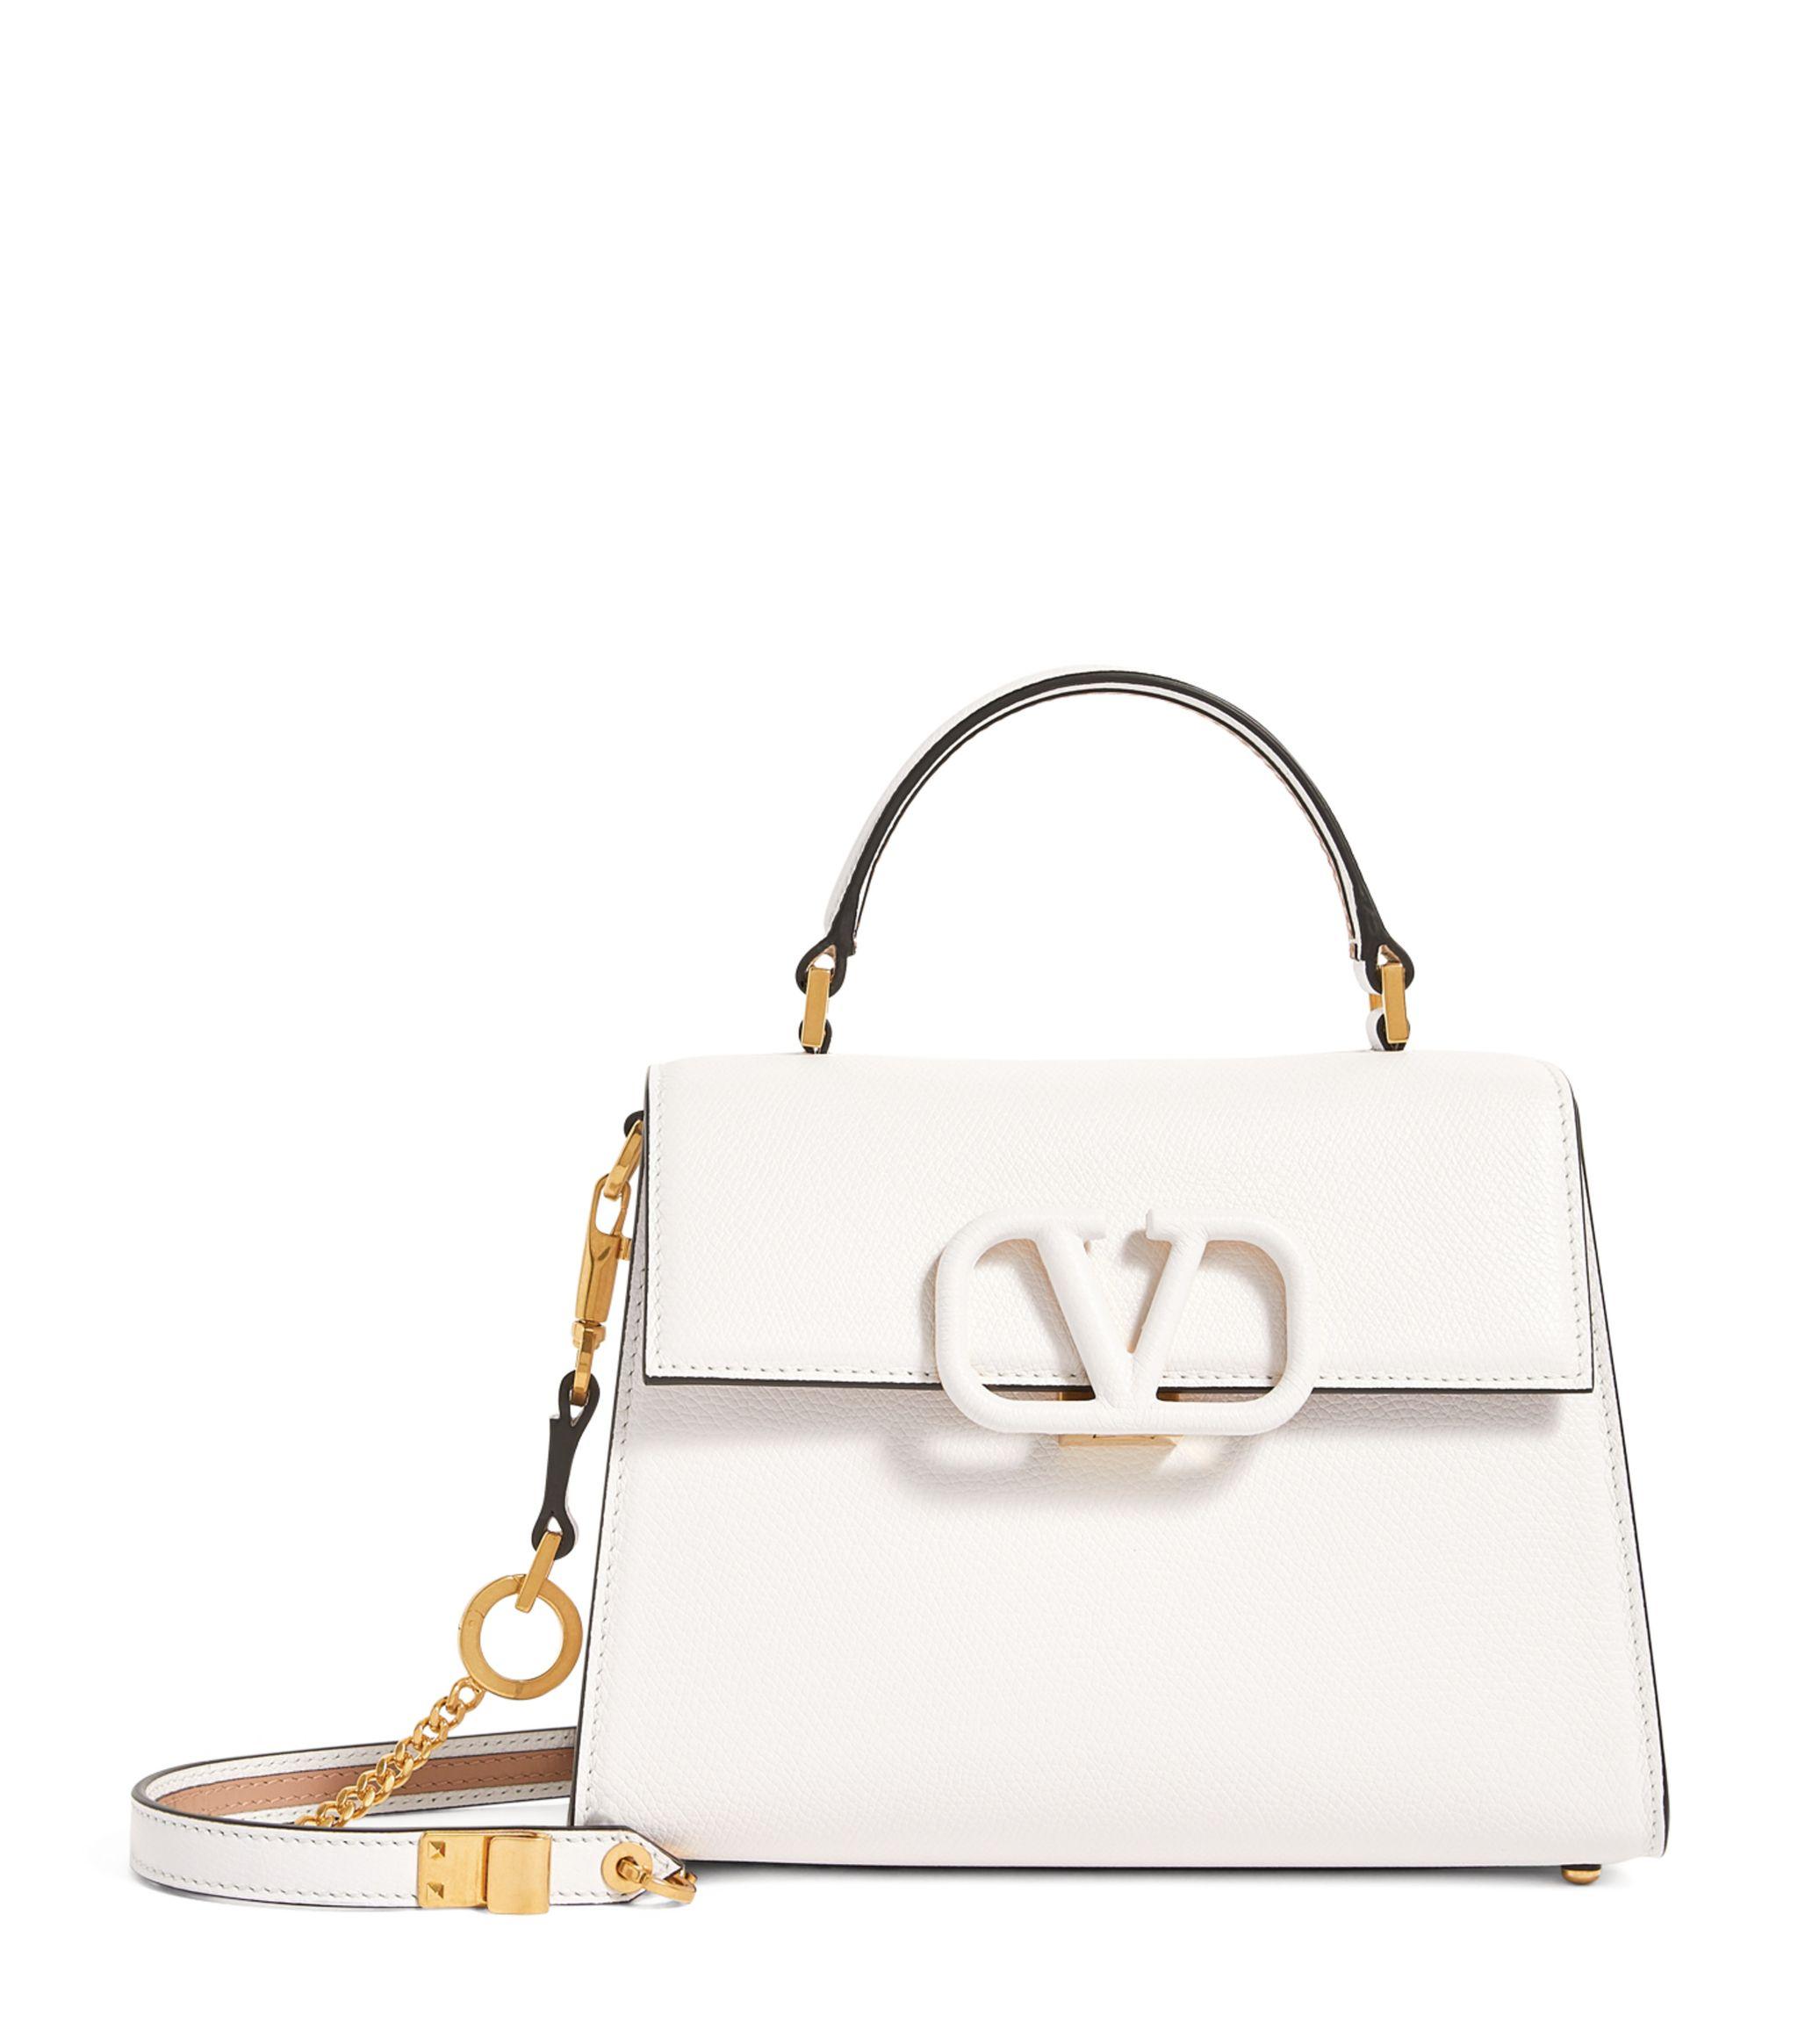 Valentino Leather Garavani Small Vsling Top-handle Bag in White - Lyst